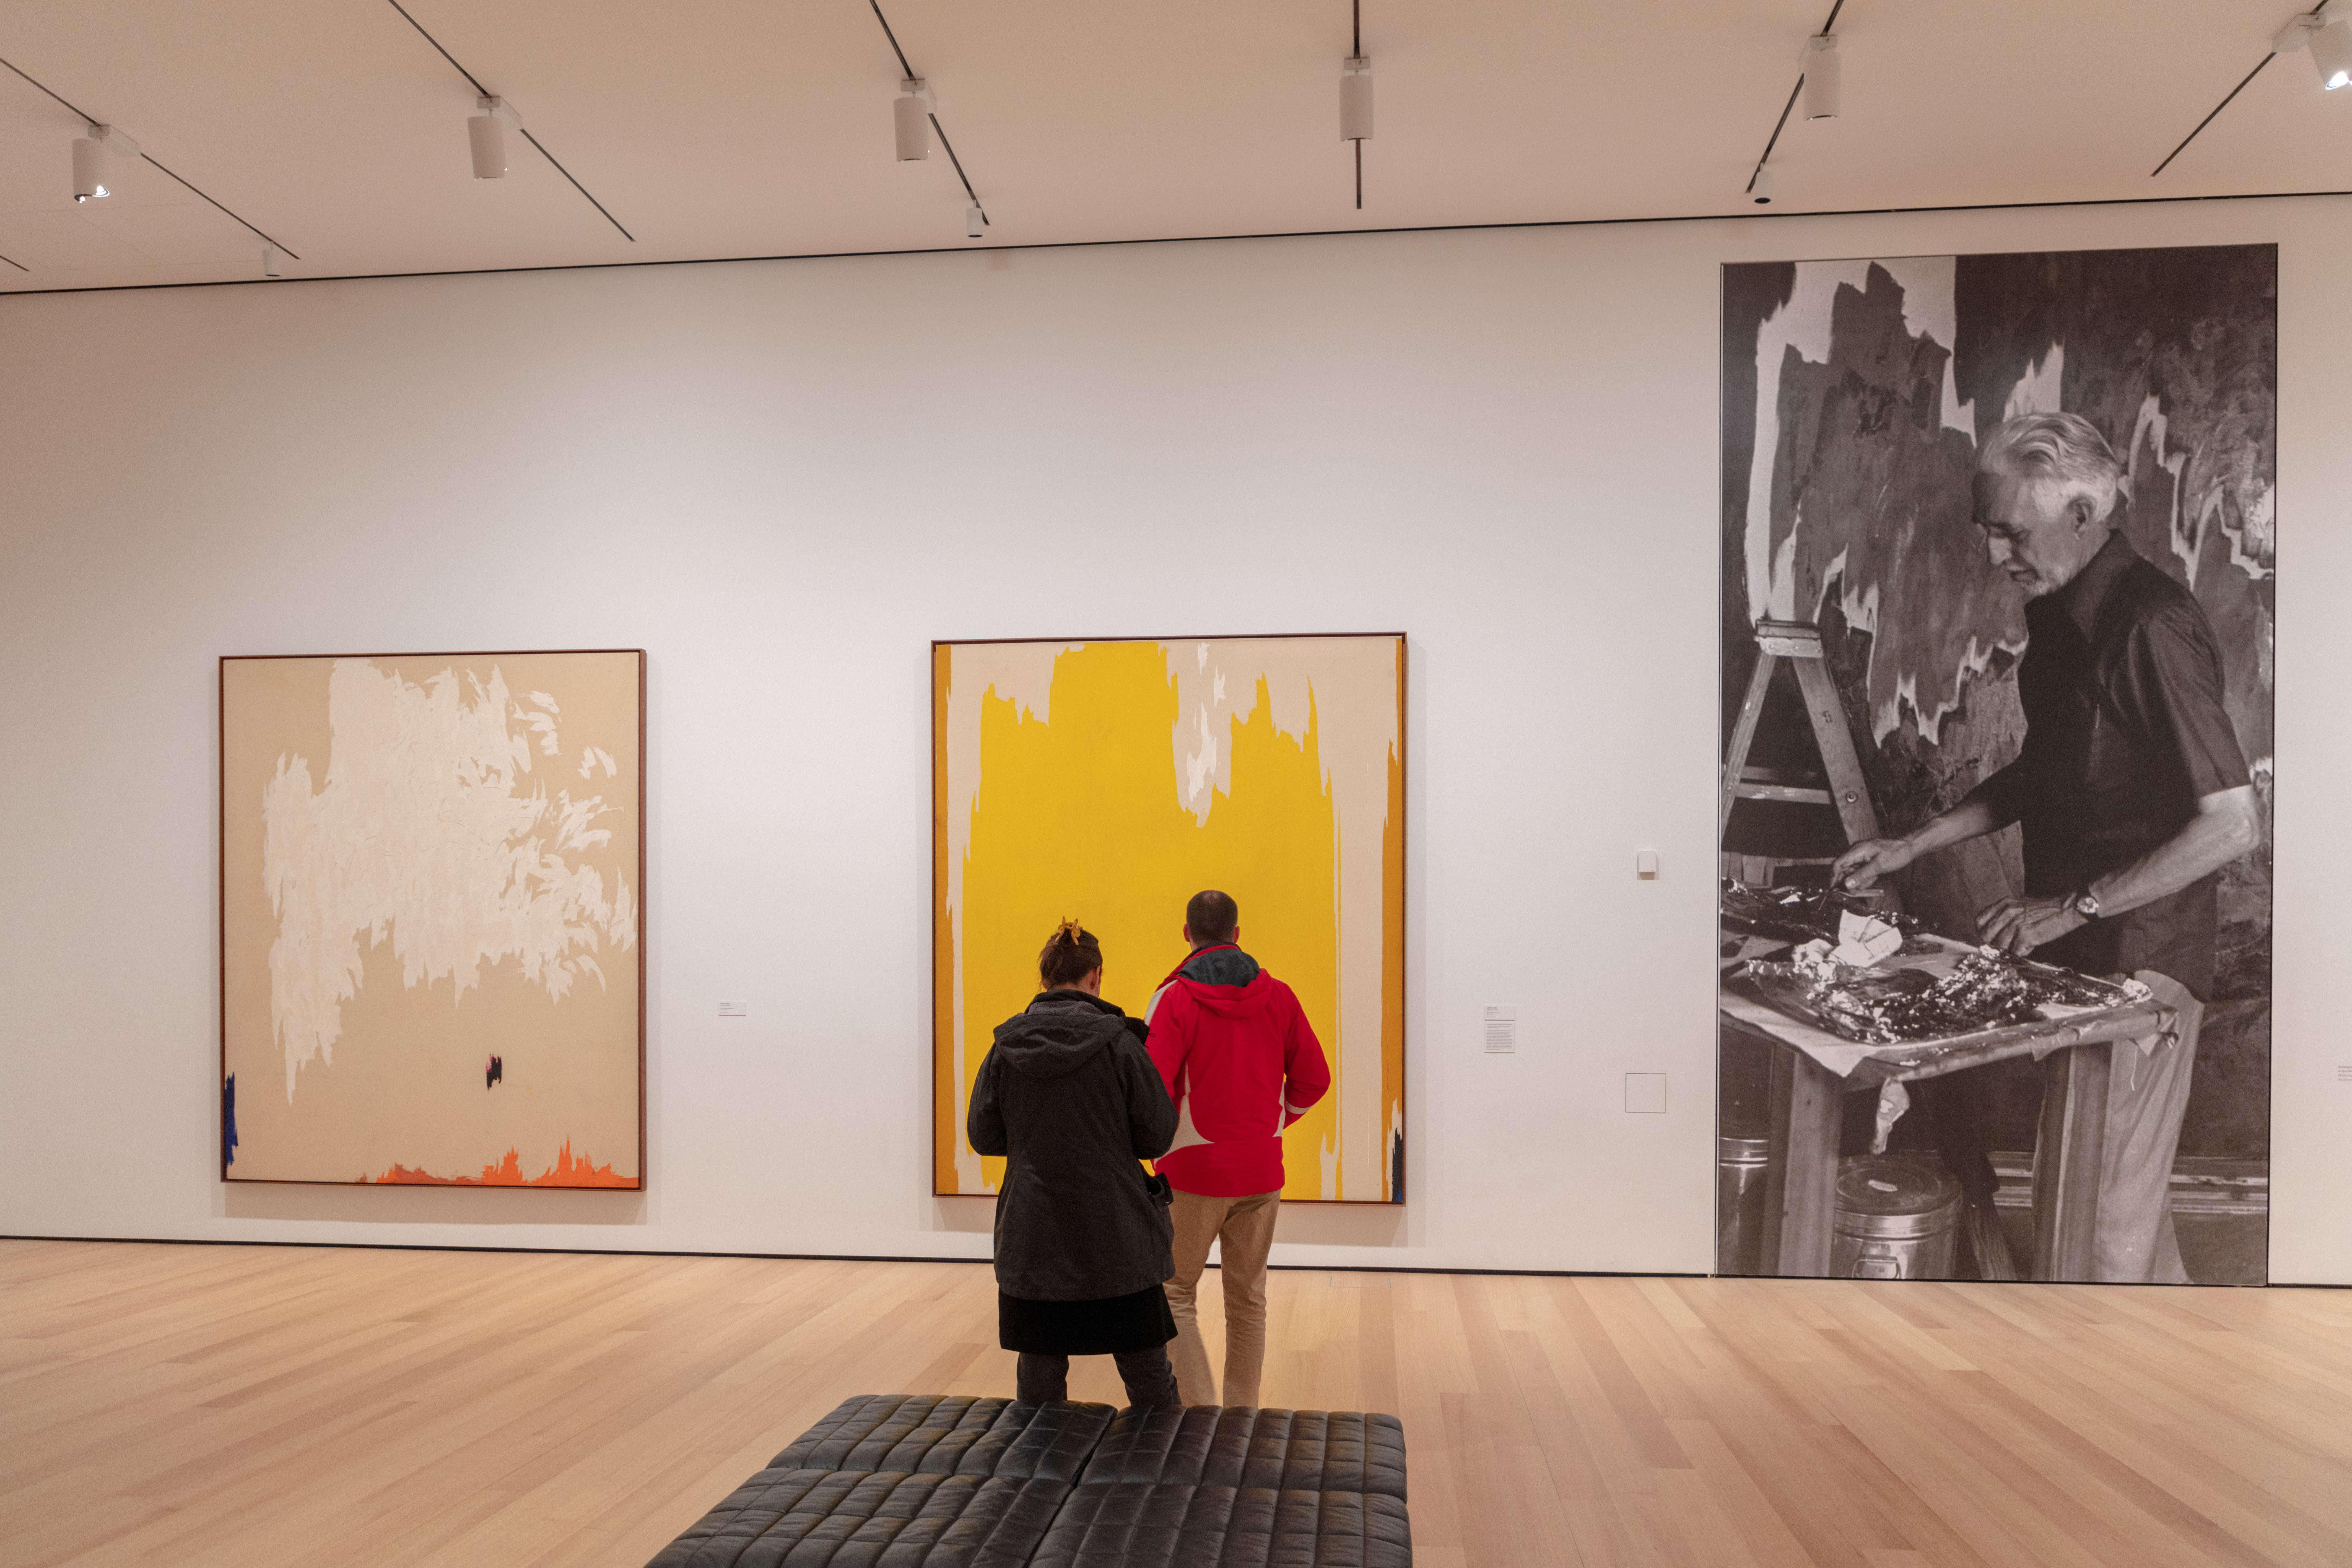 A man and woman in winter coats in the middle of an art gallery facing two large abstract paintings and large blow up photo of a man painting in a studio